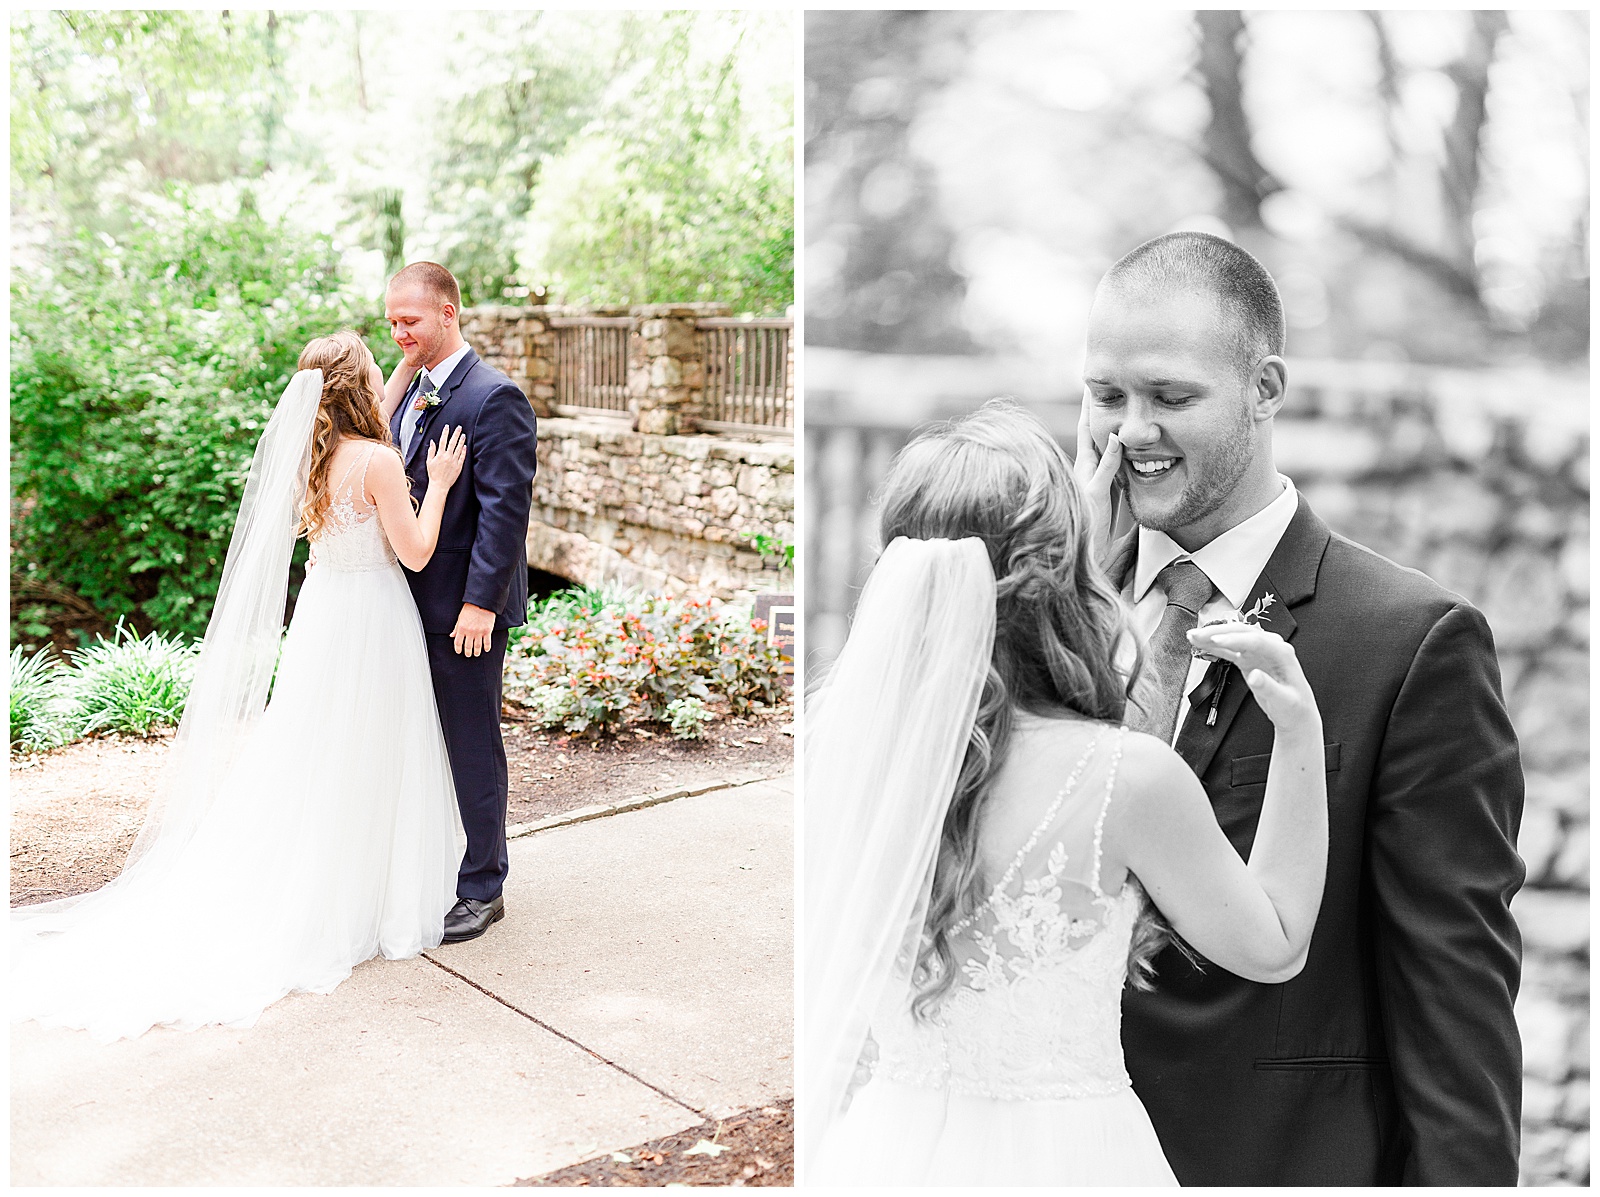 Cute Emotional Bride and Groom First Look from Elegant Modern Red and Navy Blue Themed Wedding in Charlotte, NC | check out the full wedding at KevynDixonPhoto.com